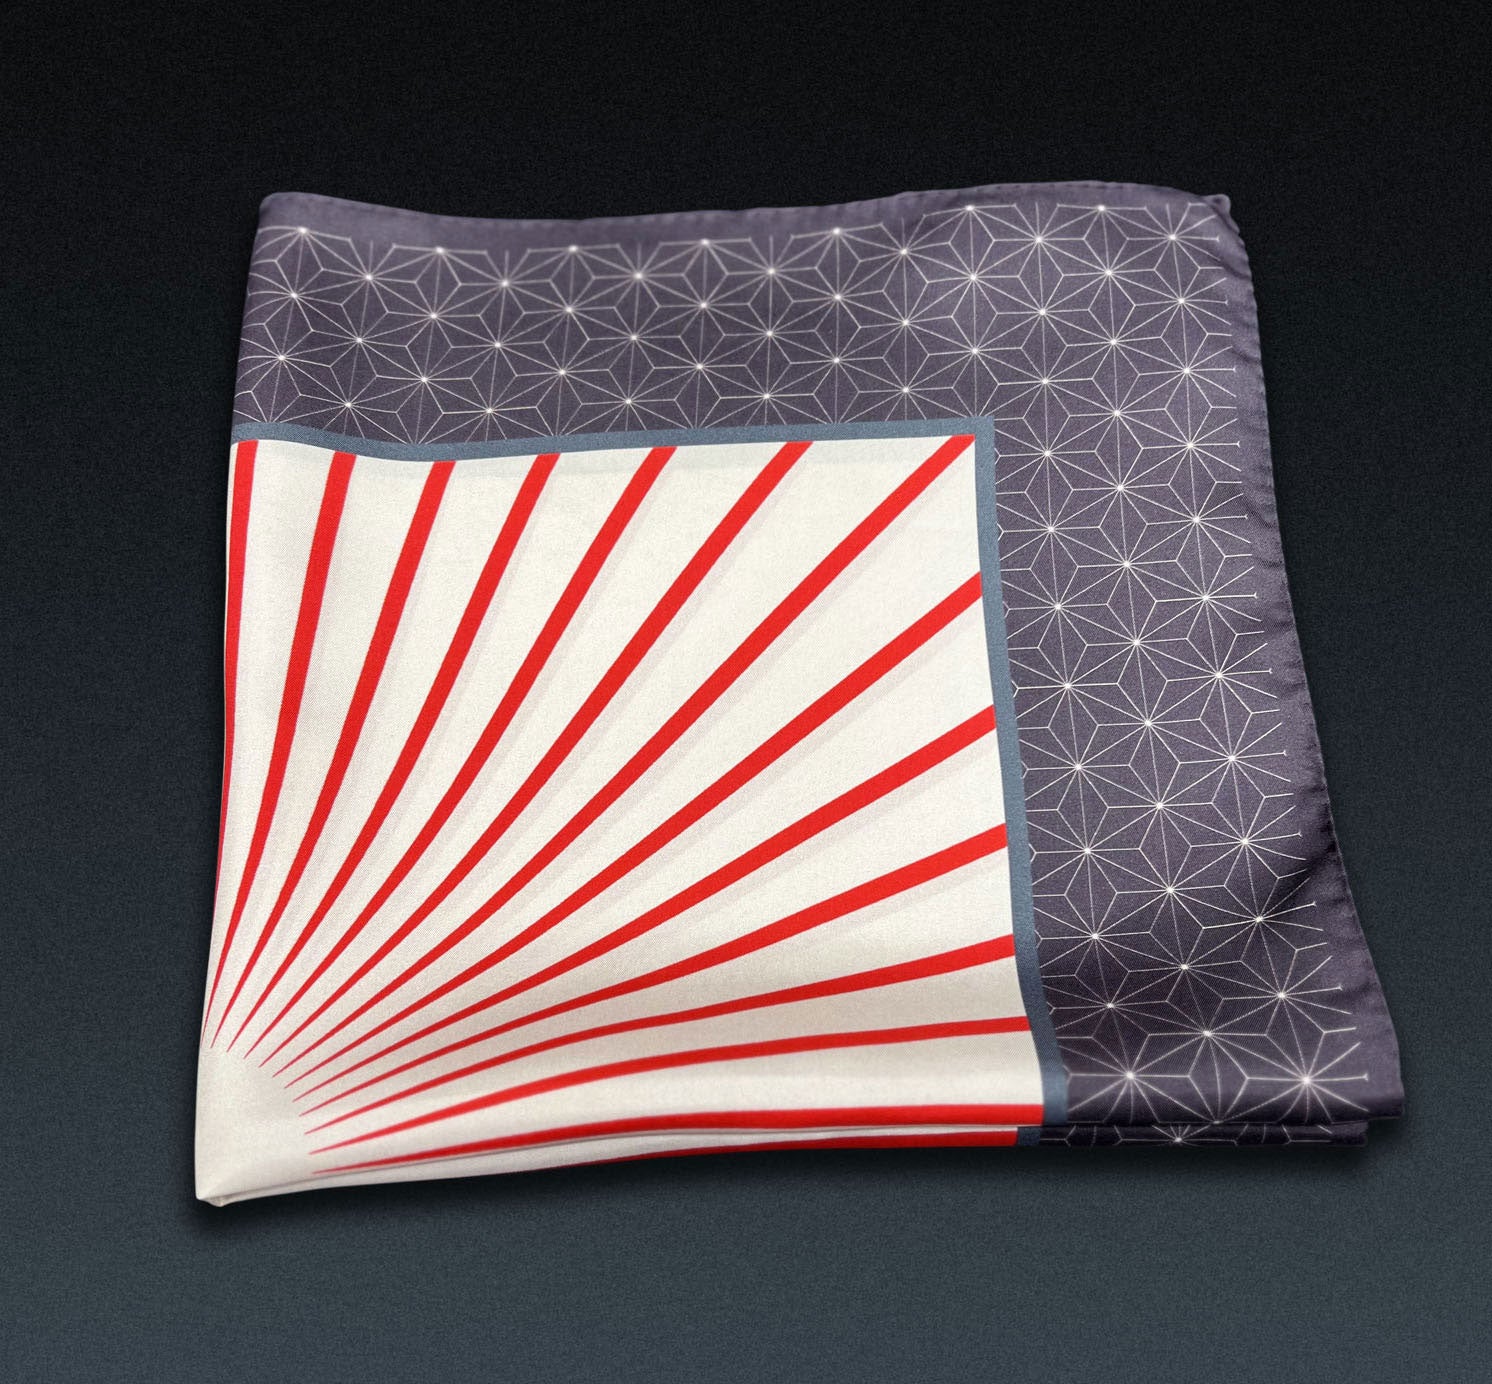 Red starburst 'Sun' neckerchief folded into a quarter, showing red, linear pattern and grey border.